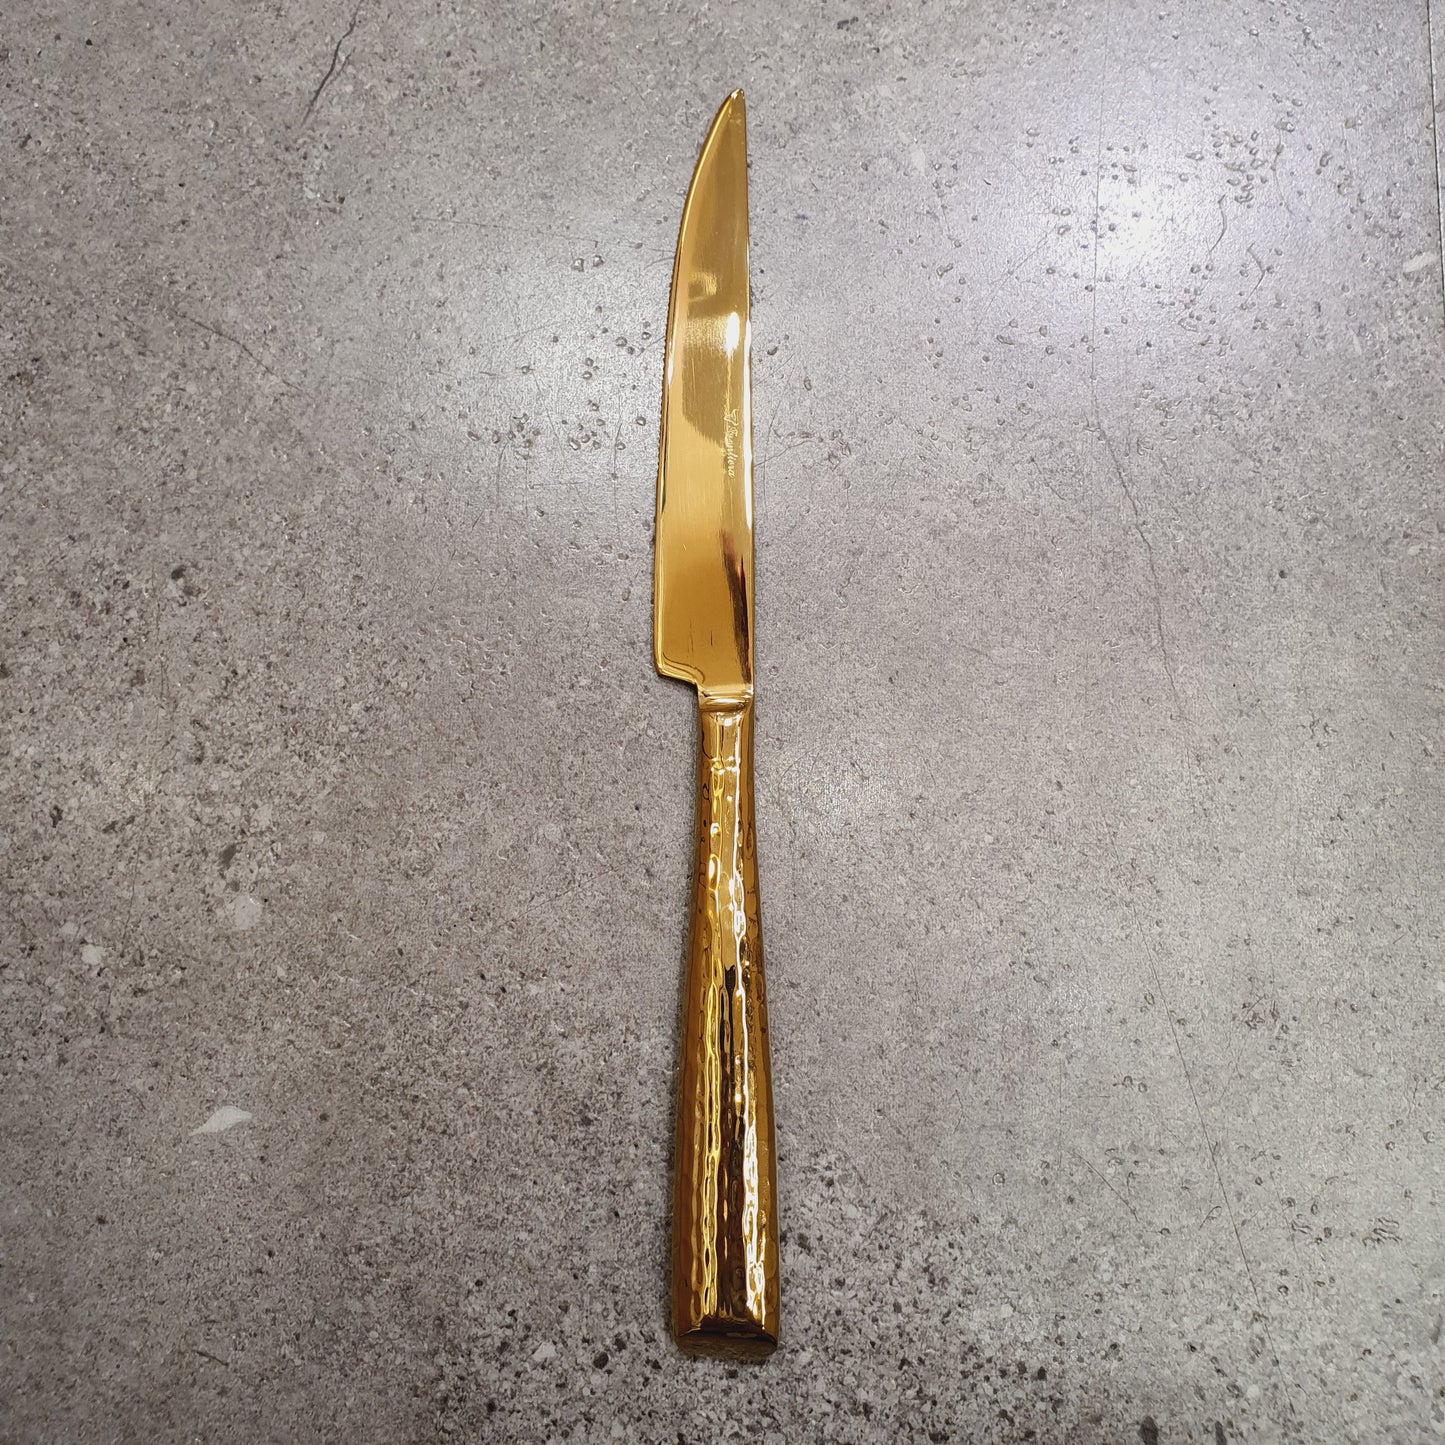 Frontiera Hammered Gold Table Knife 238mm [𝗦𝗢𝗟𝗗 𝗢𝗨𝗧]